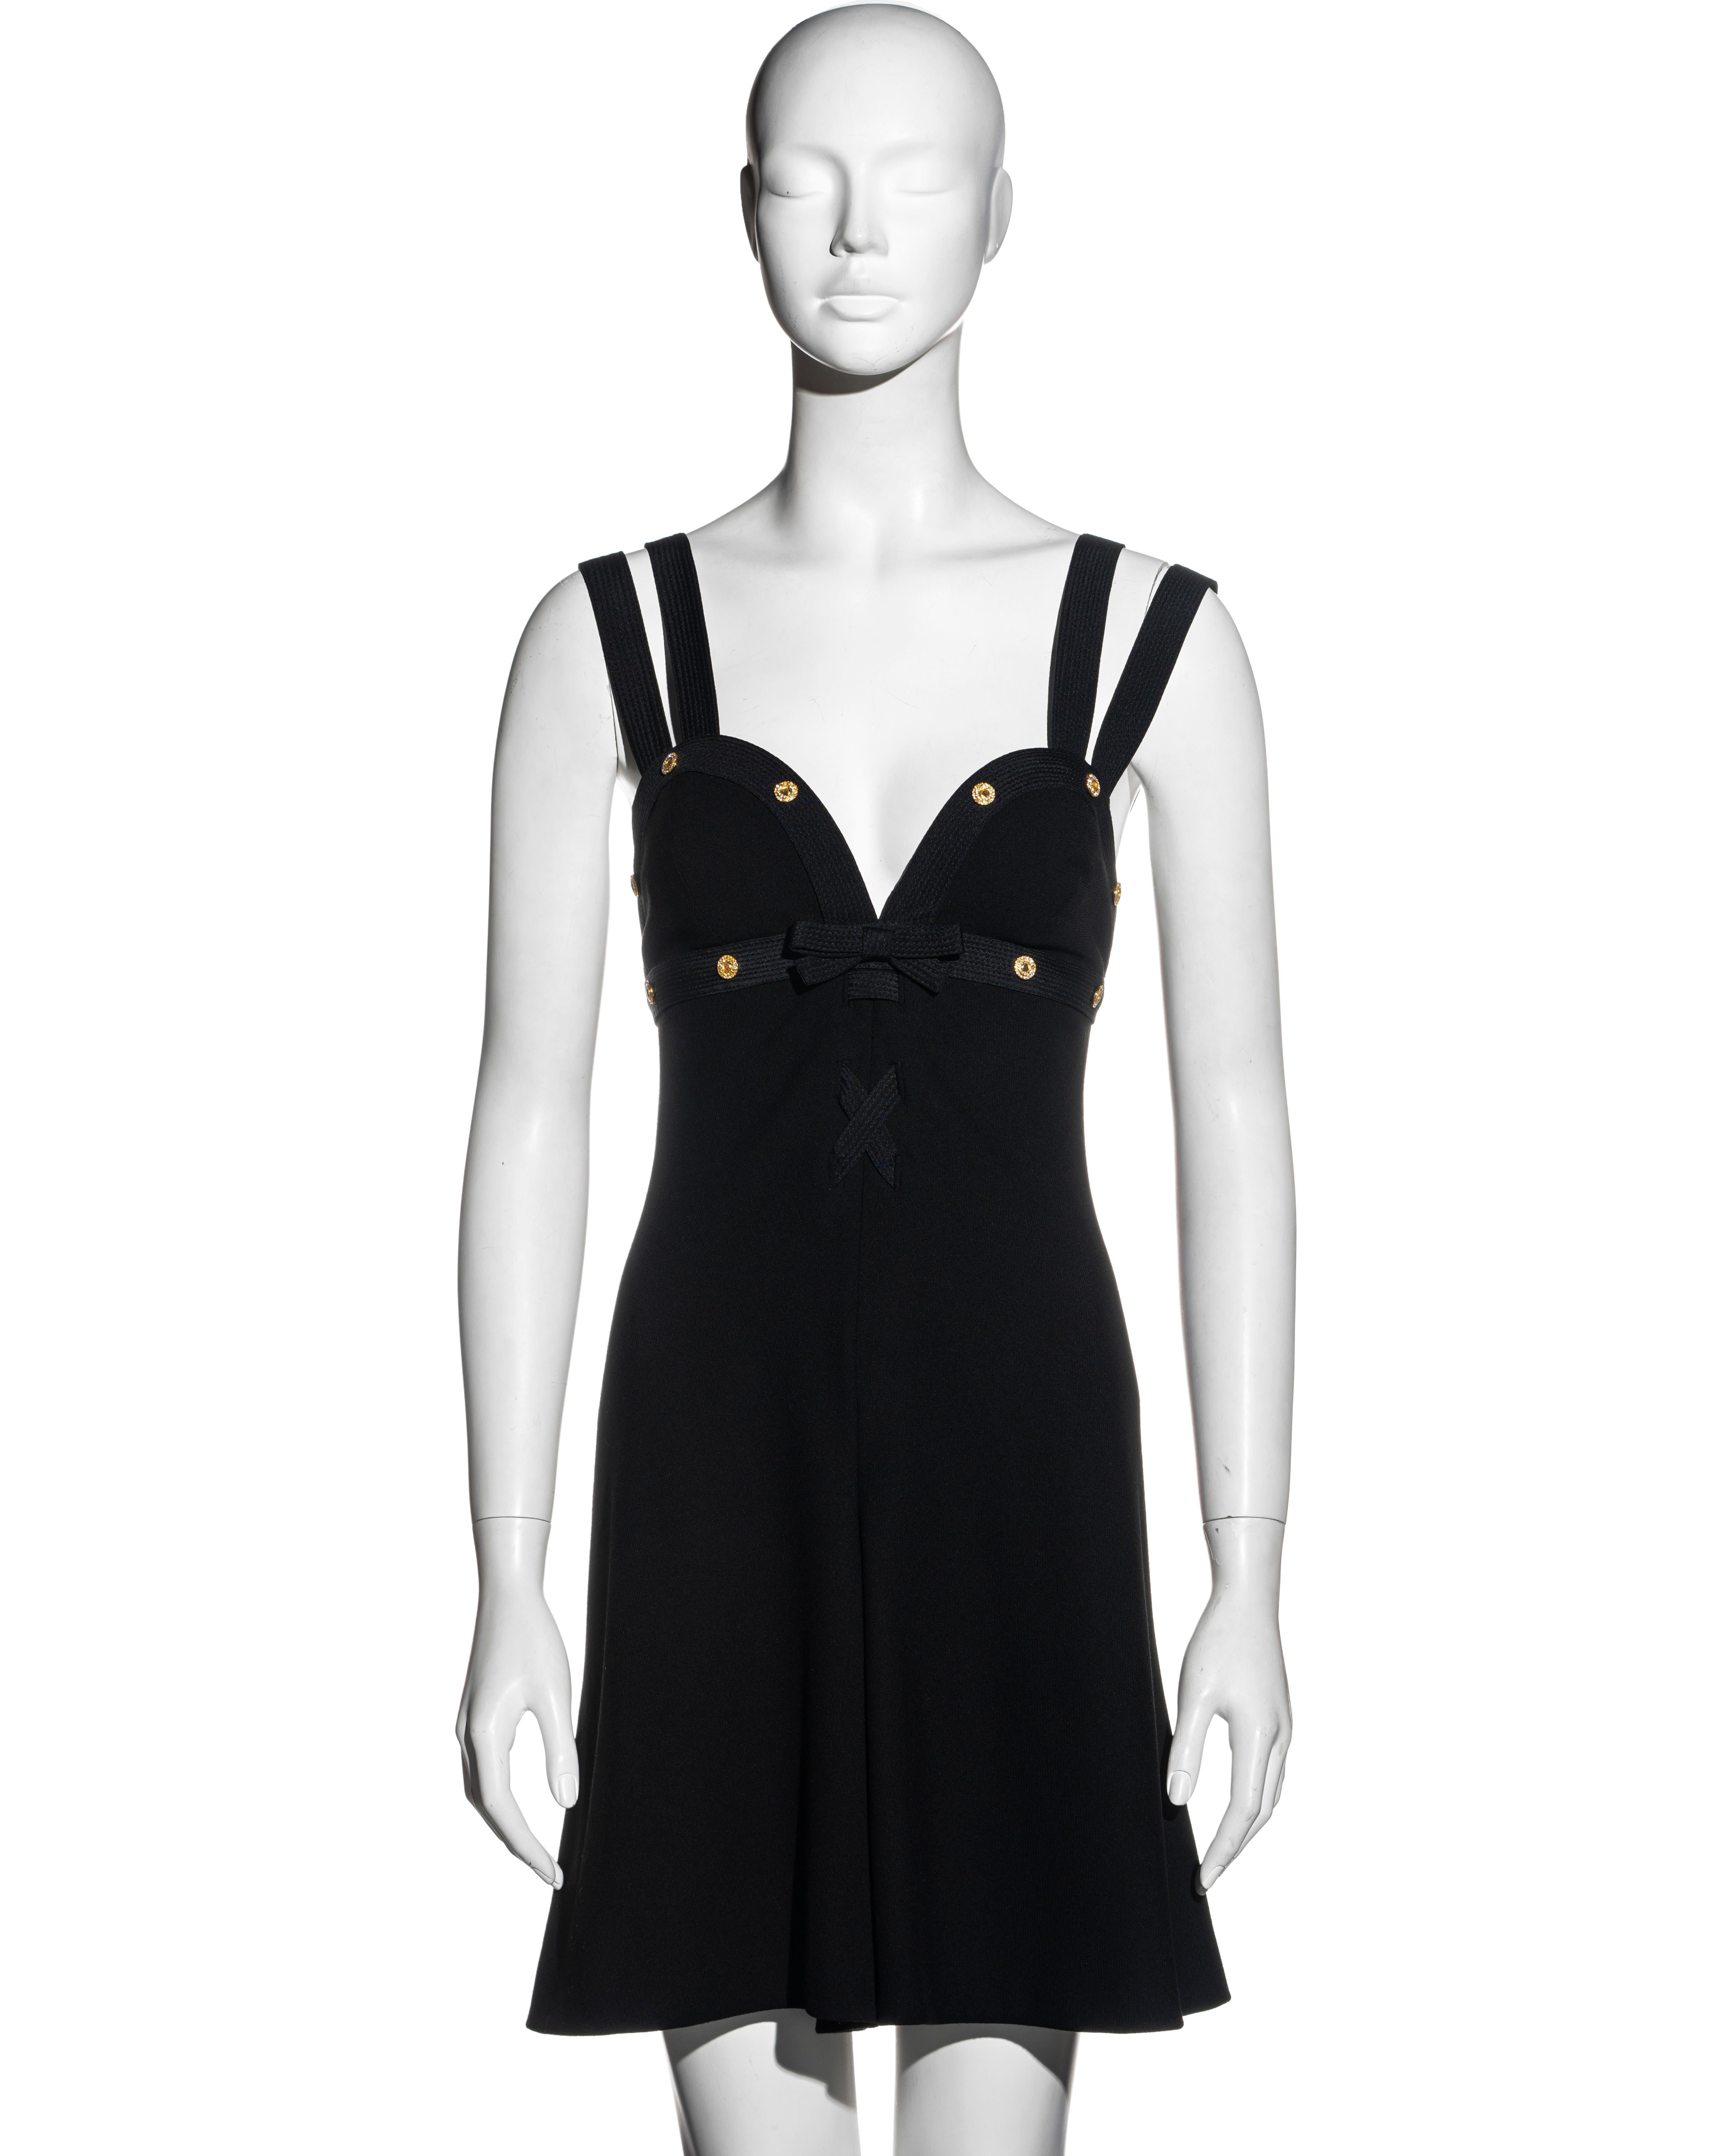 Black Gianni Versace black wool double strap playsuit with gold crystal studs, ss 1992 For Sale